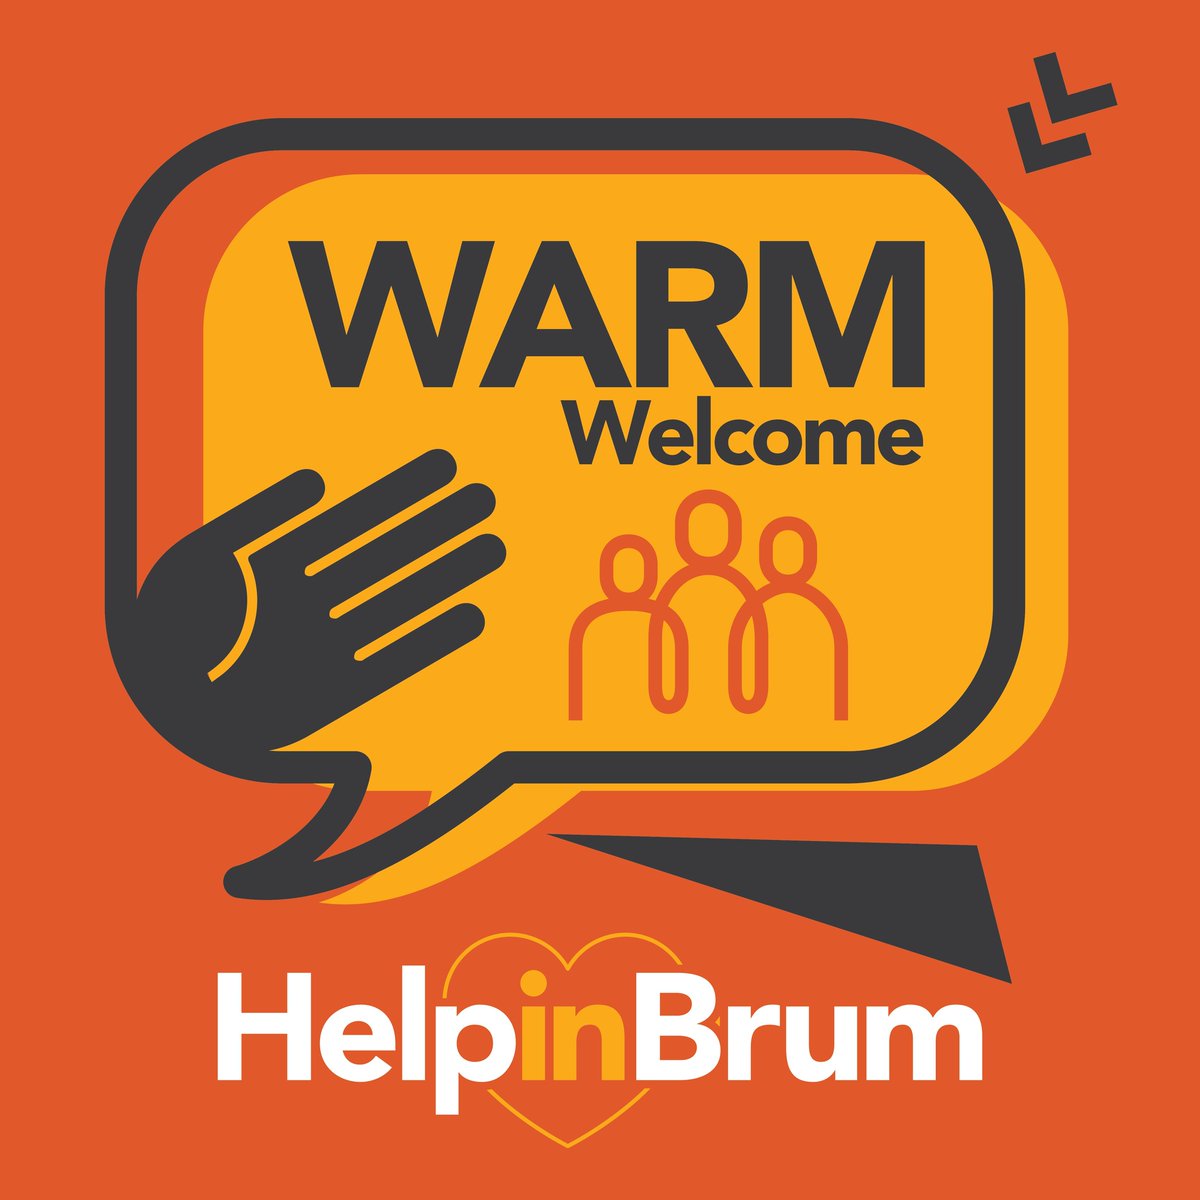 STILL TIME TO APPLY: New £200k+ fund open to help enhance & expand #Birmingham's Warm Welcomes network. Grants up to £10k are available to help improve / add to facilities & support provided at these spaces. To apply👉orlo.uk/VSJbO CLOSING DATE: 11 Jan 2023 #HelpinBrum